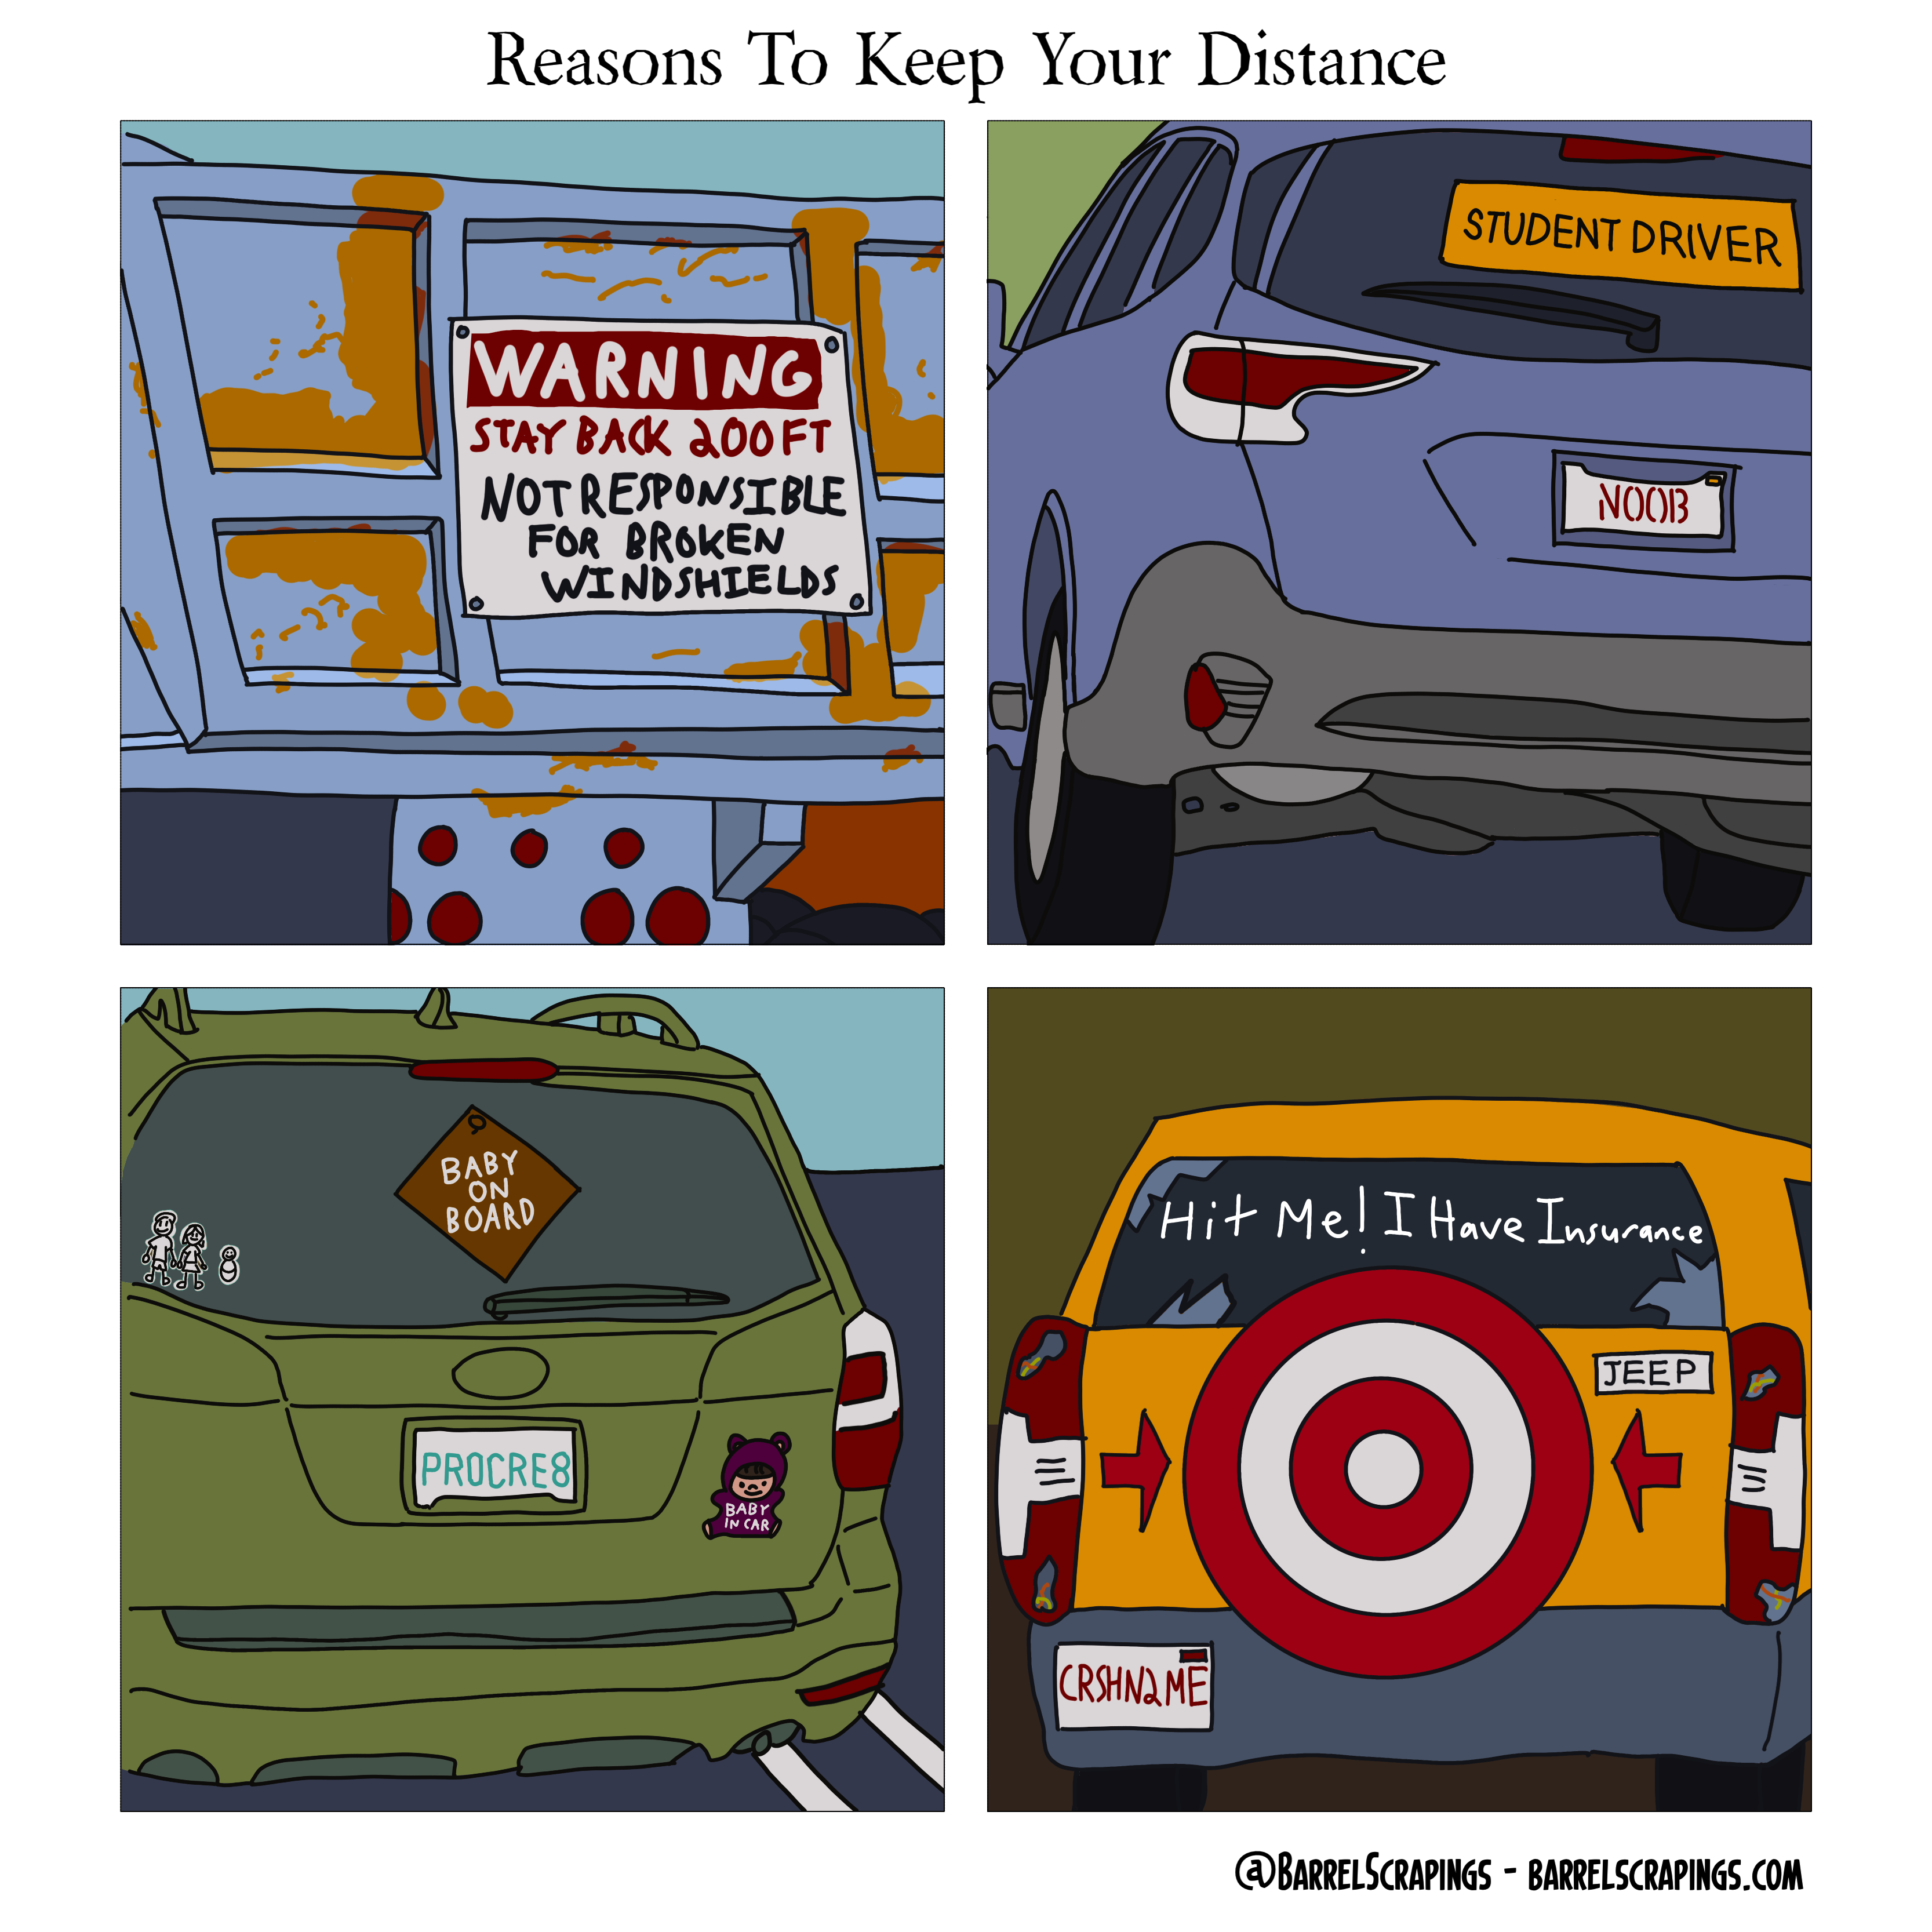 Four panels, with top title of “Reasons to keep your distance.” Panel 1: A construction truck with a large warning sign saying “Warningg Stay Back 200 FT. Not responsible for broken windshields”. Panel 2: A car with STUDENT DRIVER sign, and “NOOB” license plate. Panel 3: Car with BABY ON BOARD sign, little family stickers sign, “PROCRE8” license plate, and decal indicating “BABY IN CAR”. Panel 4: Jeep with broken windshield and tail lights. Tire on back is in shape of a target. Text on back window says “Hit me! I have insurance”. License plate says “CRSH N2 ME”.